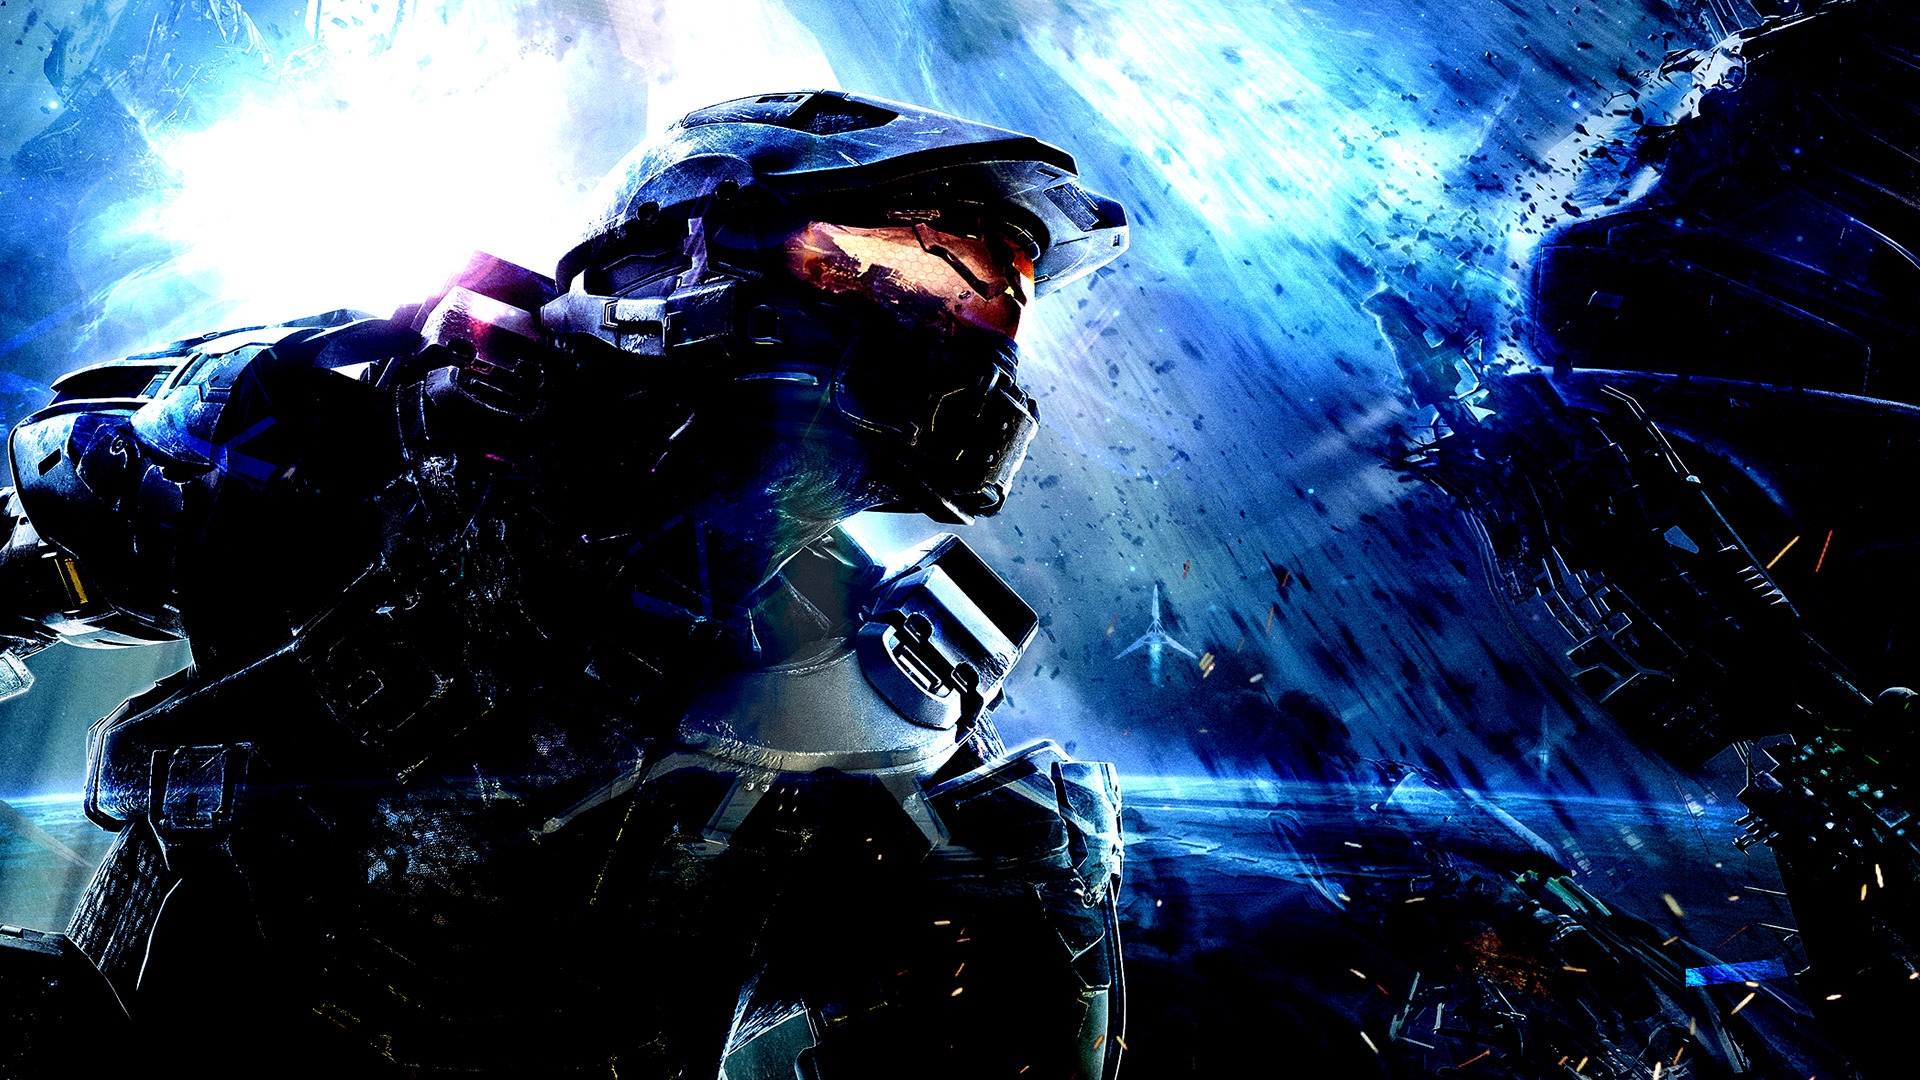 Halo 4 Complex for 1920 x 1080 HDTV 1080p resolution